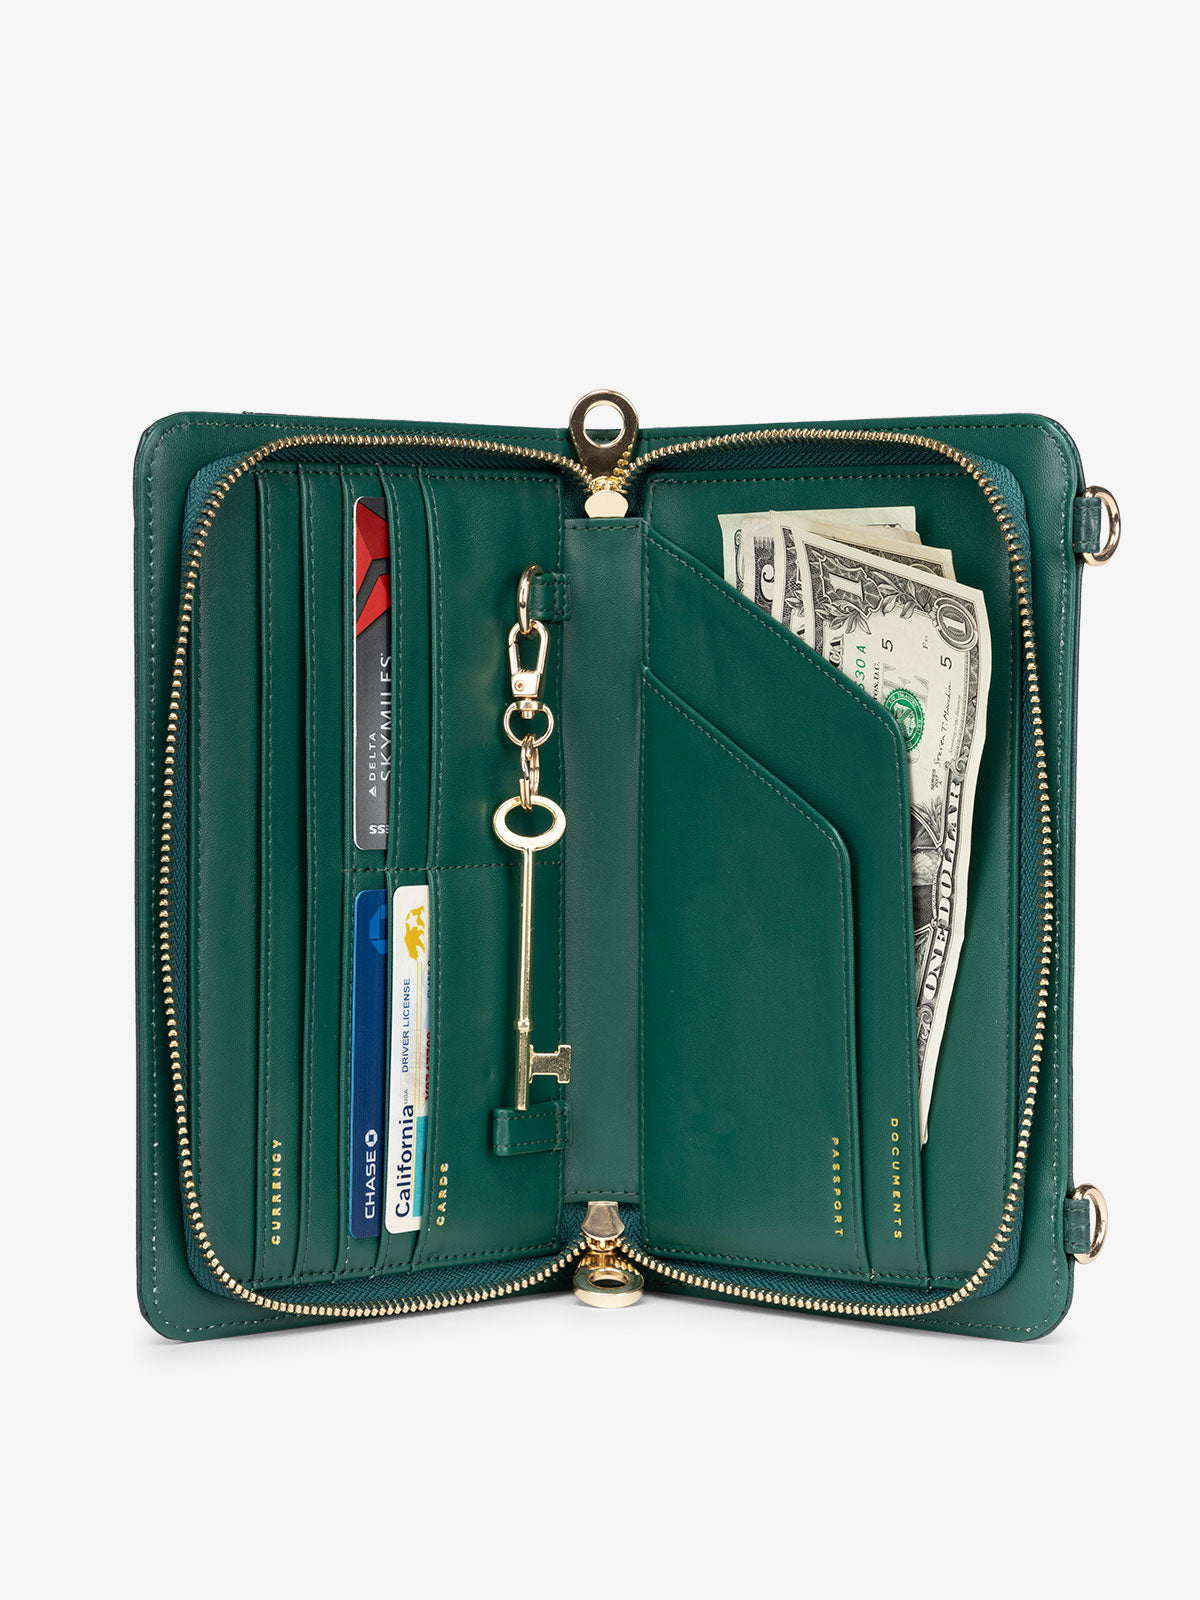 Interior of dark green emerald RFID lined CALPAK Croc Wallet featuring multiple pockets for cards and travel documents